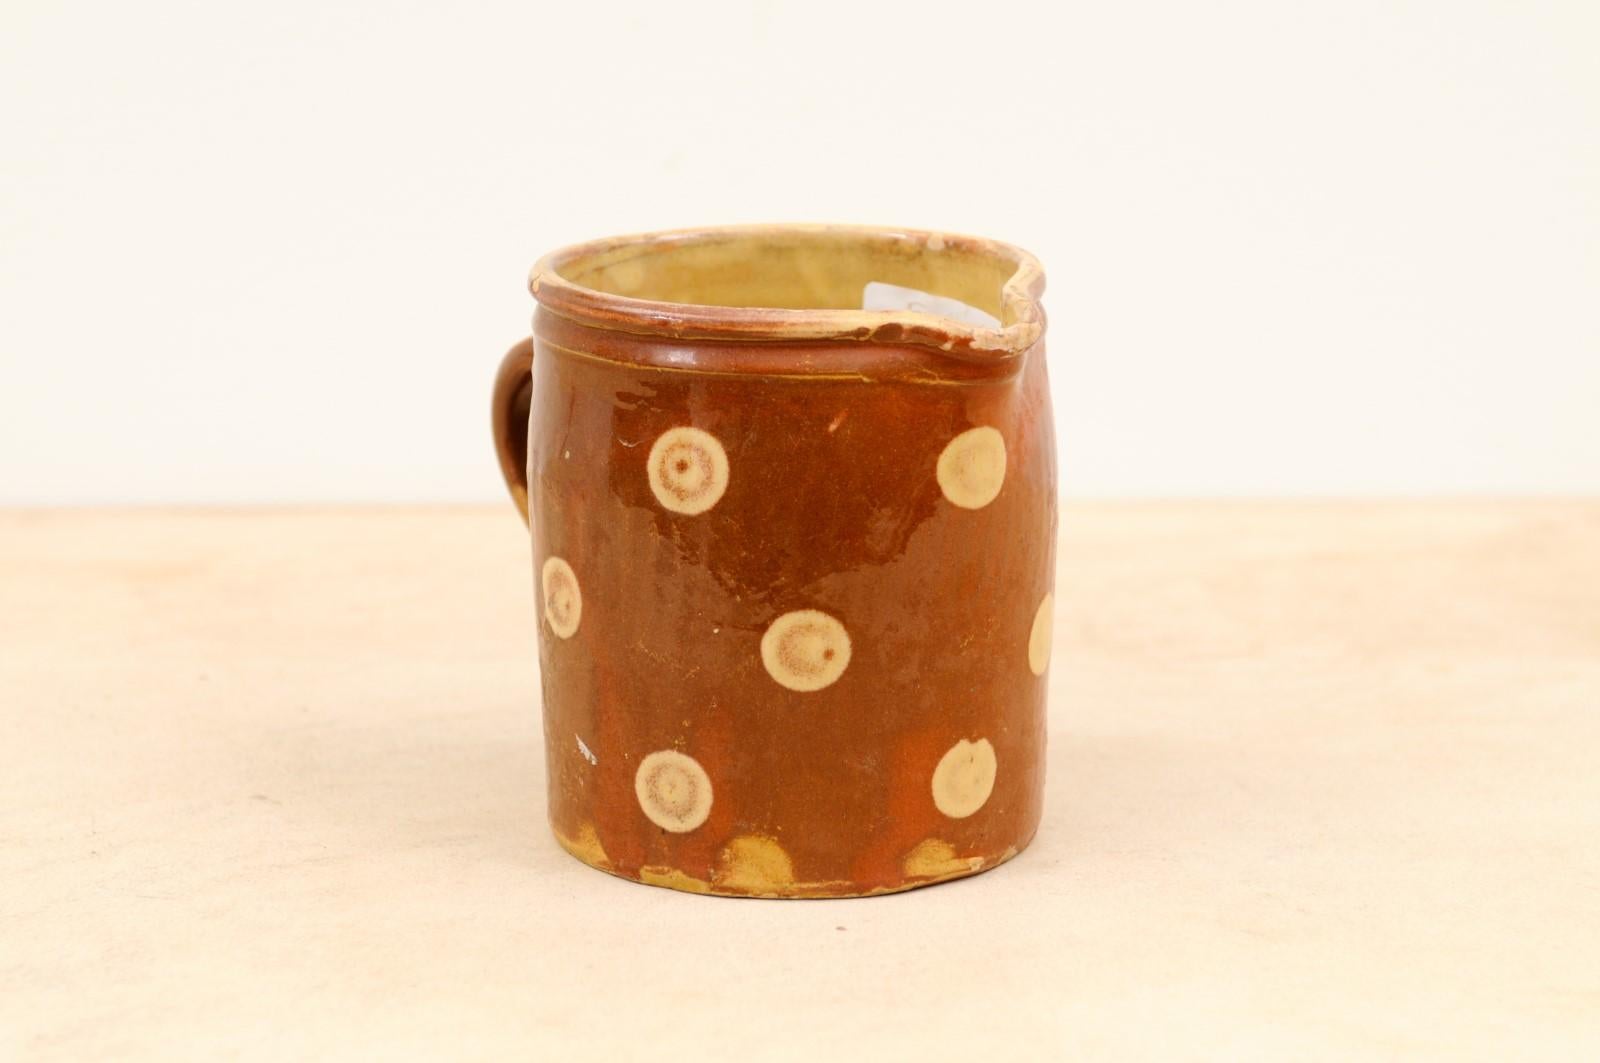 A French jaspé ware pottery pitcher from the 19th century, with brown glaze and cream polka dots. Created in France during the 19th century, this French jaspé pitcher attracts our attention with its brown glaze, simply adorned with cream polka dots.